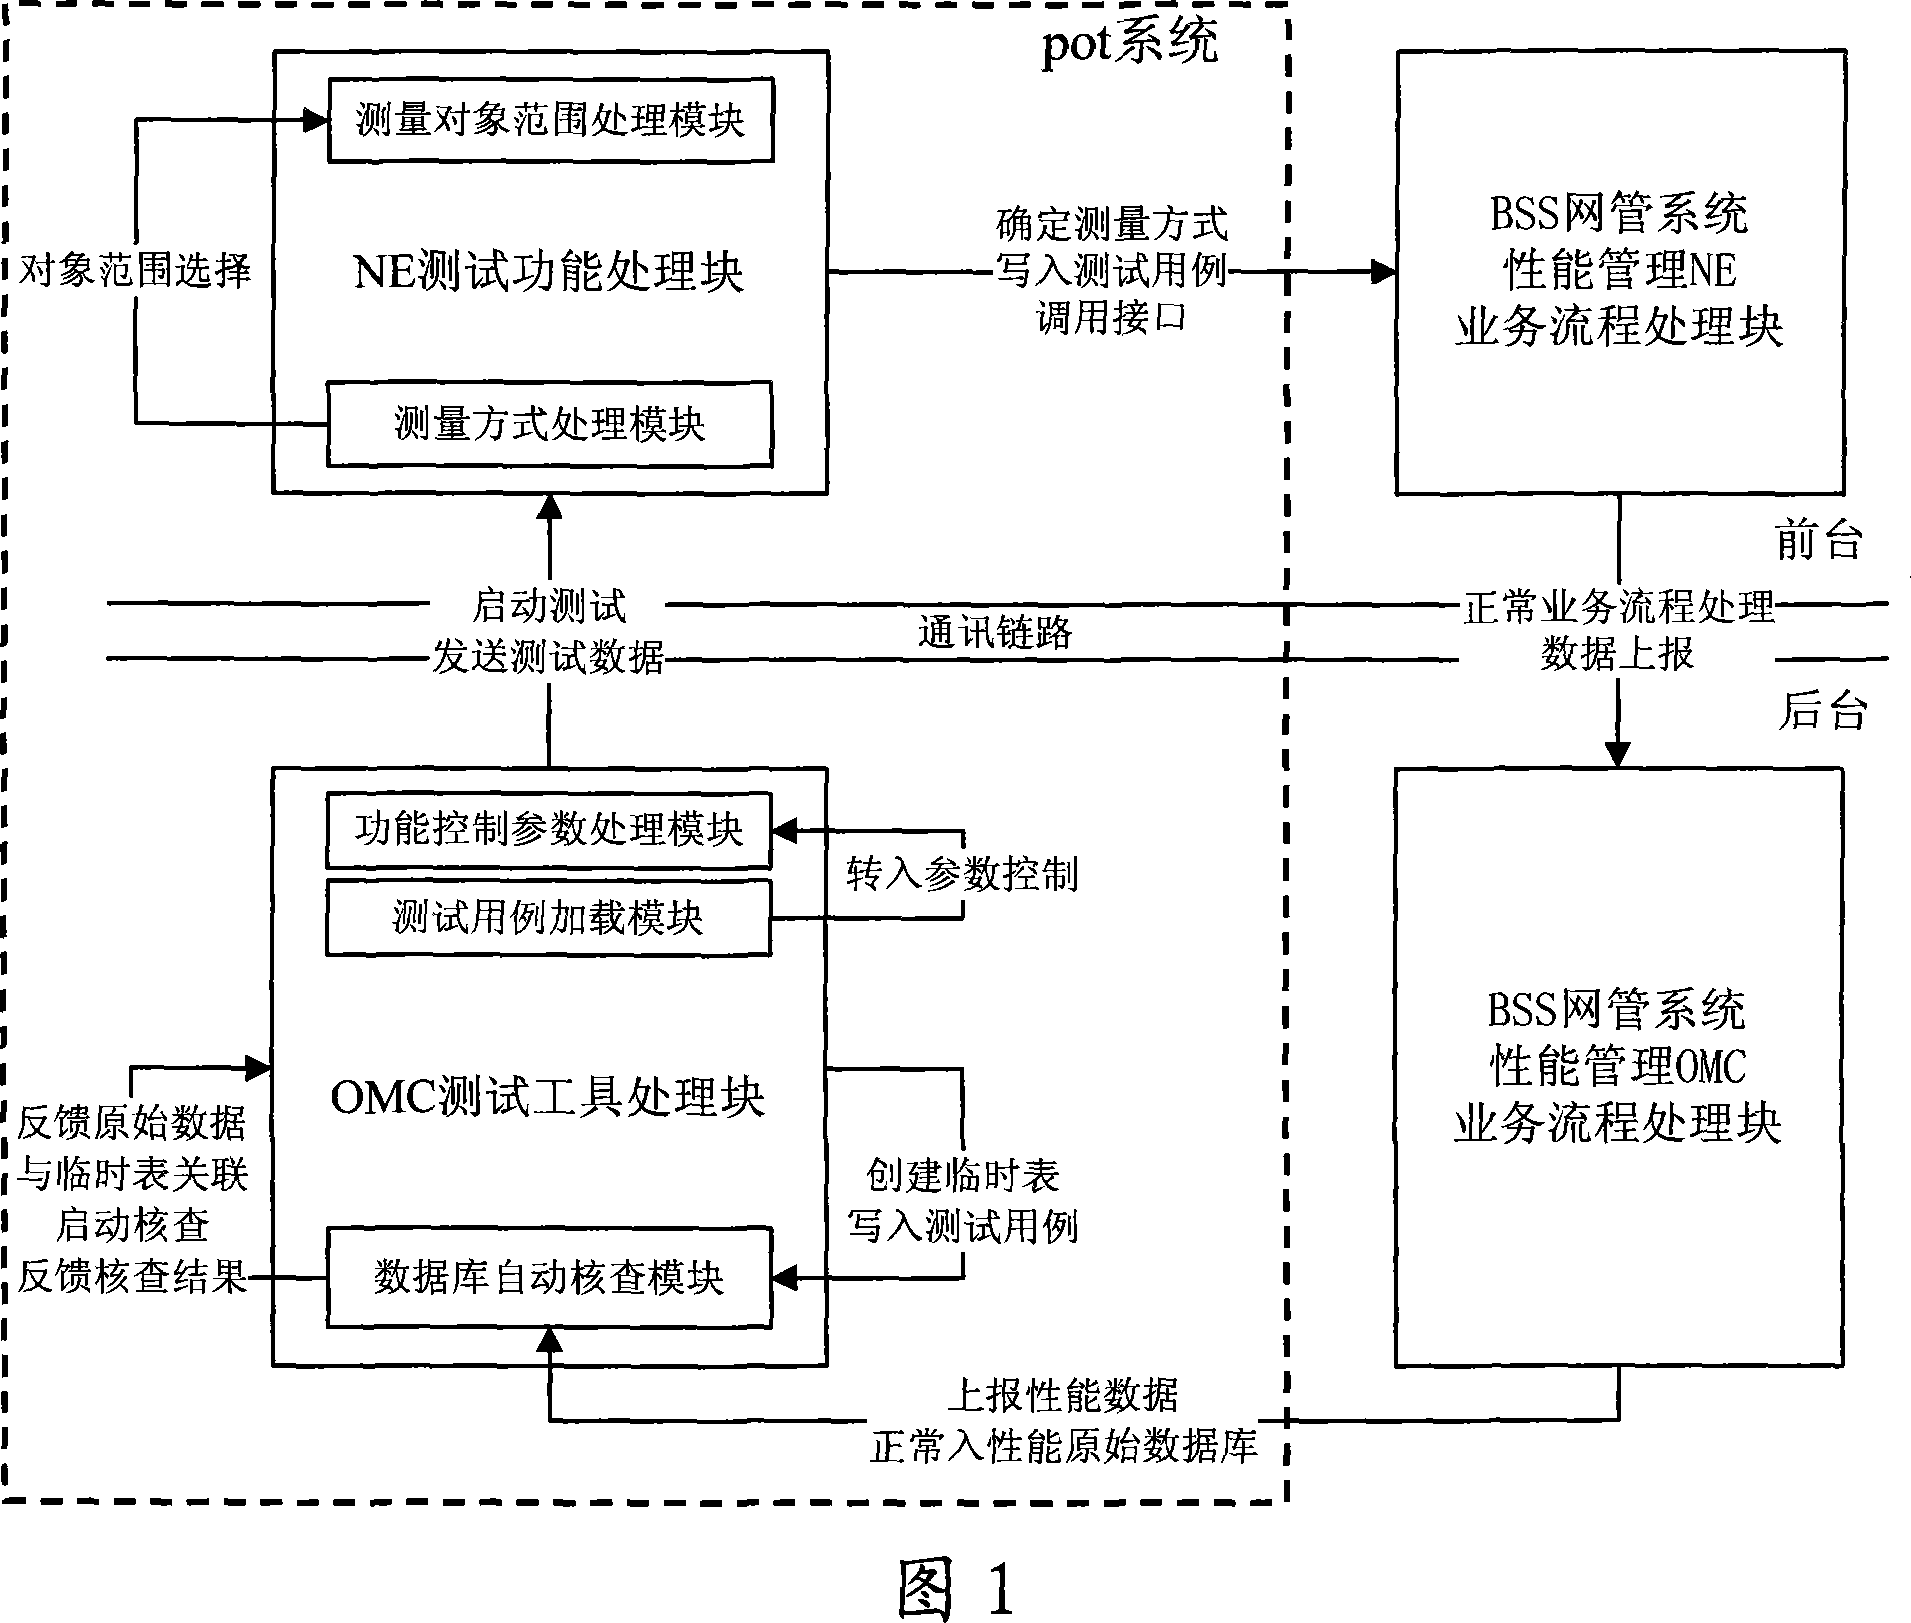 A testing system and method for original performance statistical data